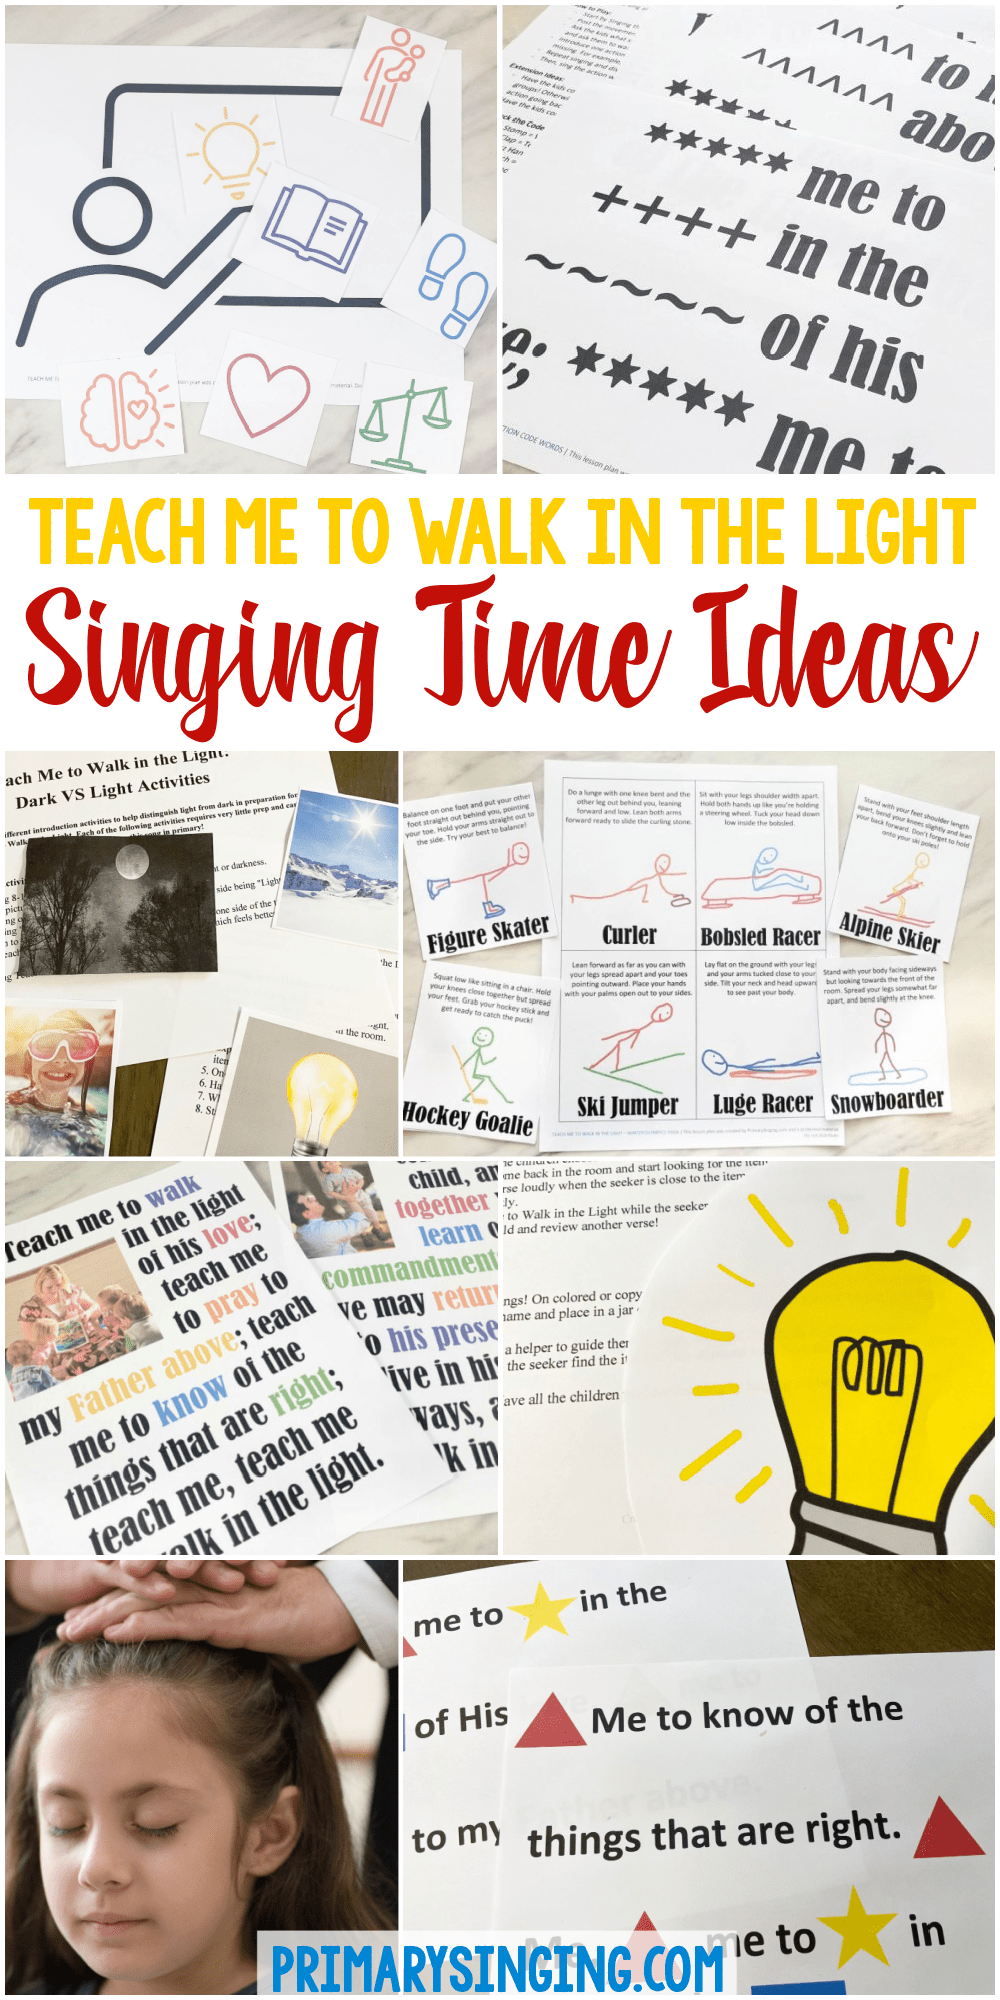 Teach Me to Walk in the Light Singing Time Ideas for LDS Primary music leaders including 12 fun ways to teach this song in Primary! Rebus, action code words, light vs dark, sports yoga and more!